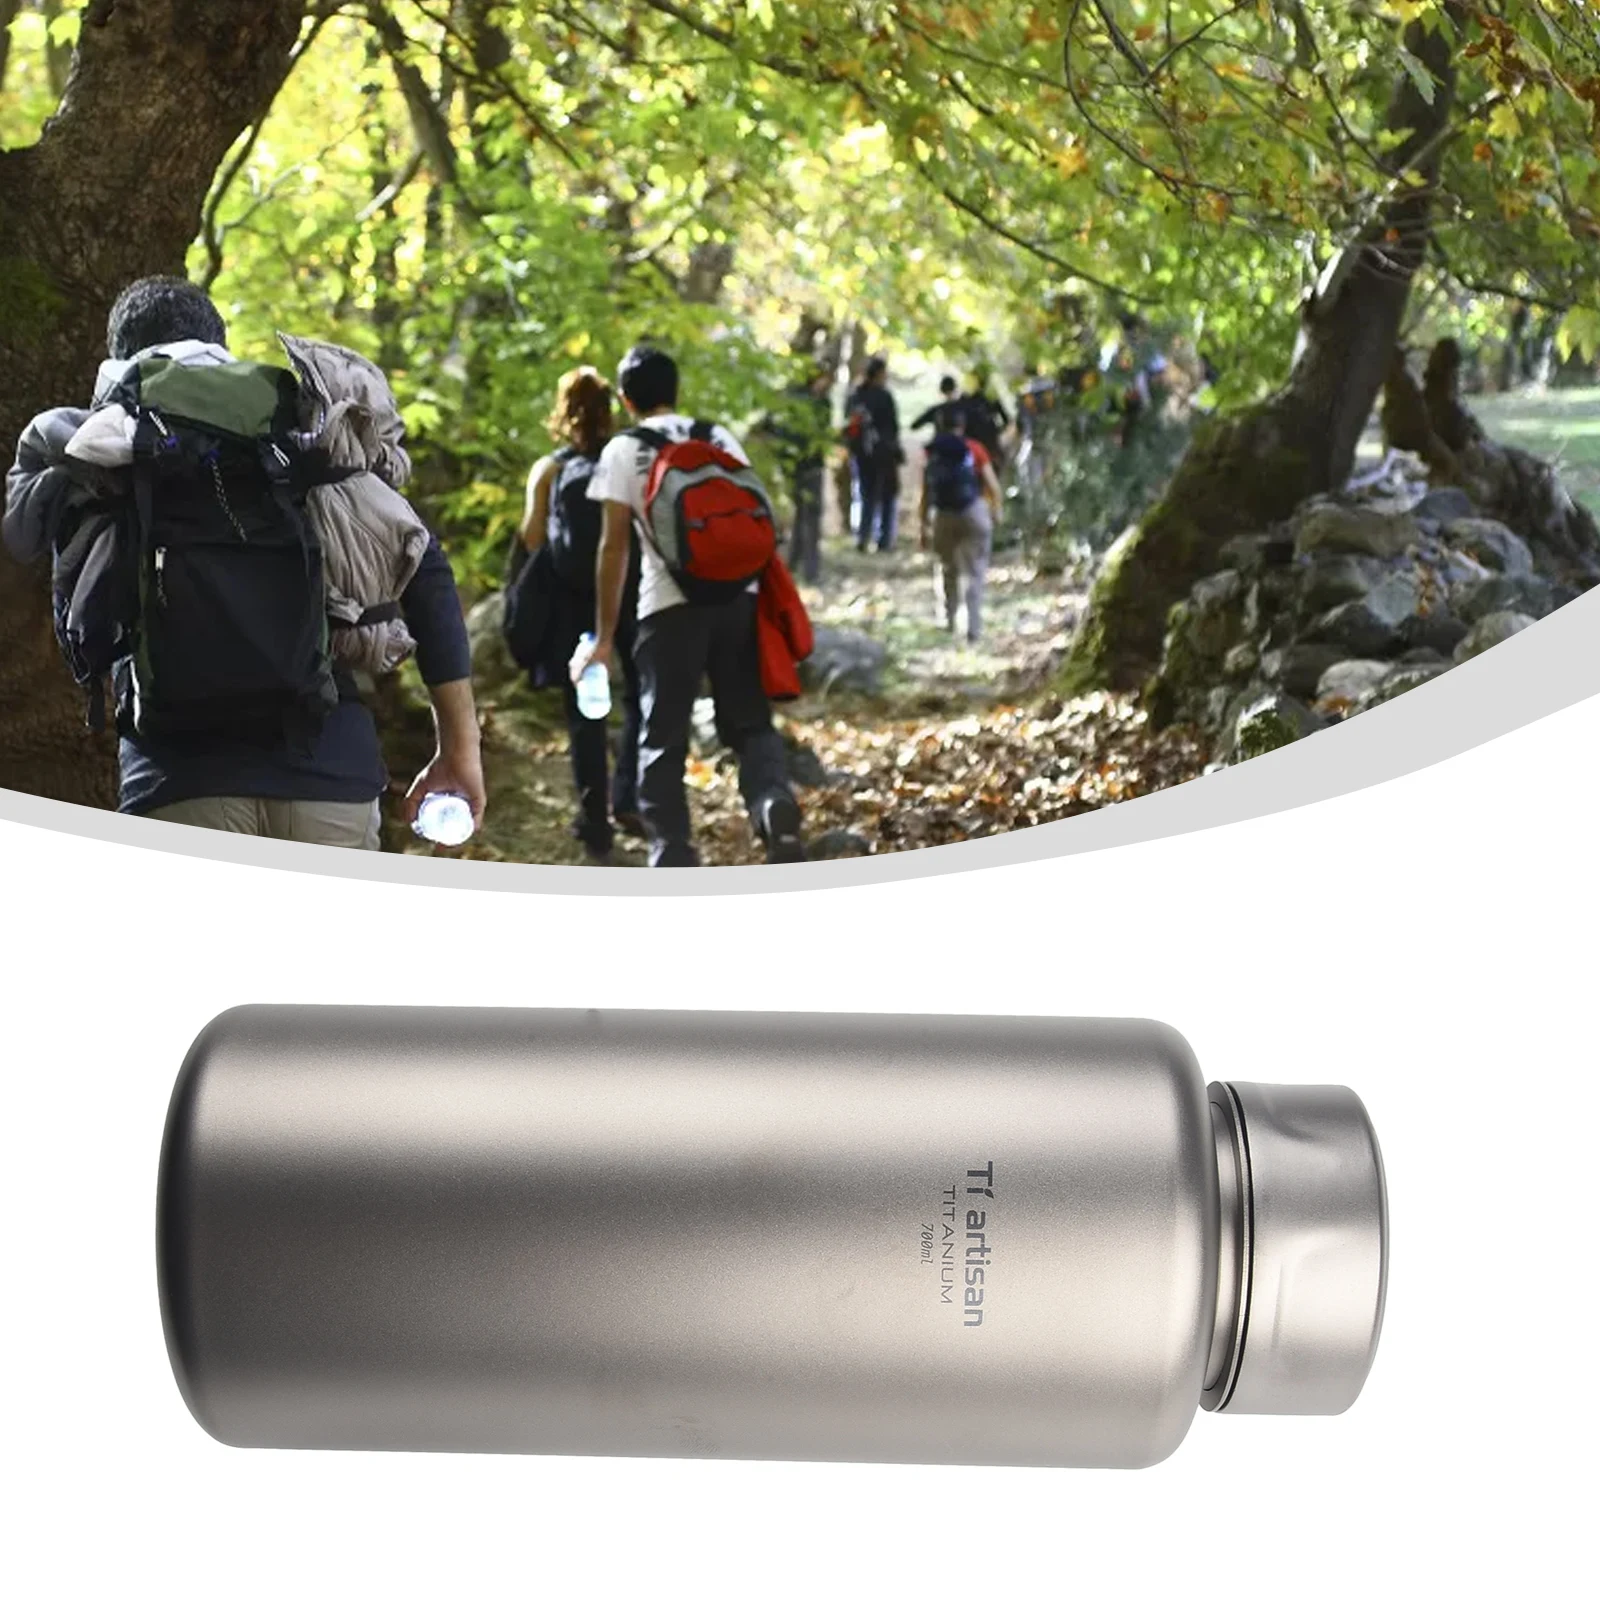 

700ml Titanium Water Bottle 1L Outdoor Camping Large Capacity Resistant Leakproof Tea Coffee Drinking Mug Wide Mouthed Kettle